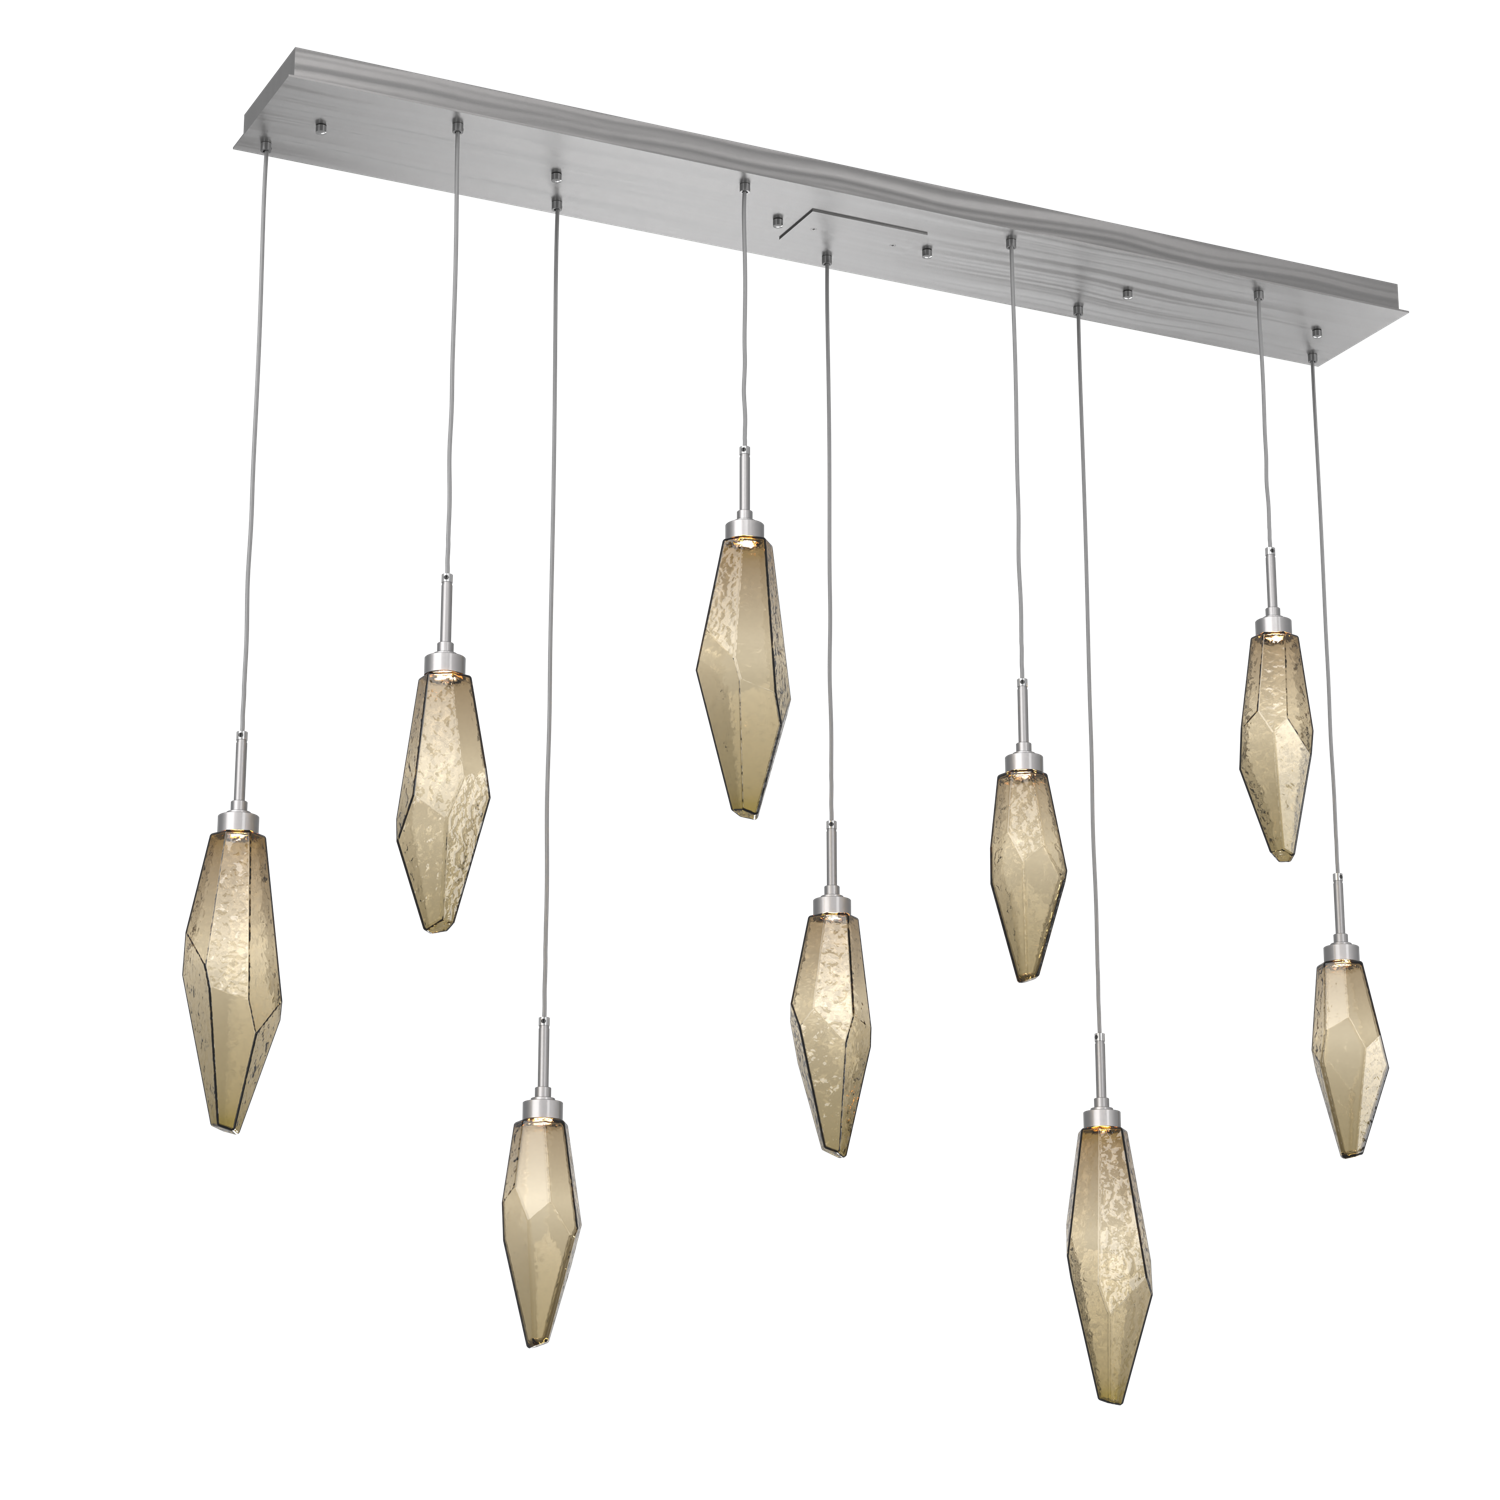 PLB0050-09-SN-CB-Hammerton-Studio-Rock-Crystal-9-light-linear-pendant-chandelier-with-satin-nickel-finish-and-chilled-bronze-blown-glass-shades-and-LED-lamping